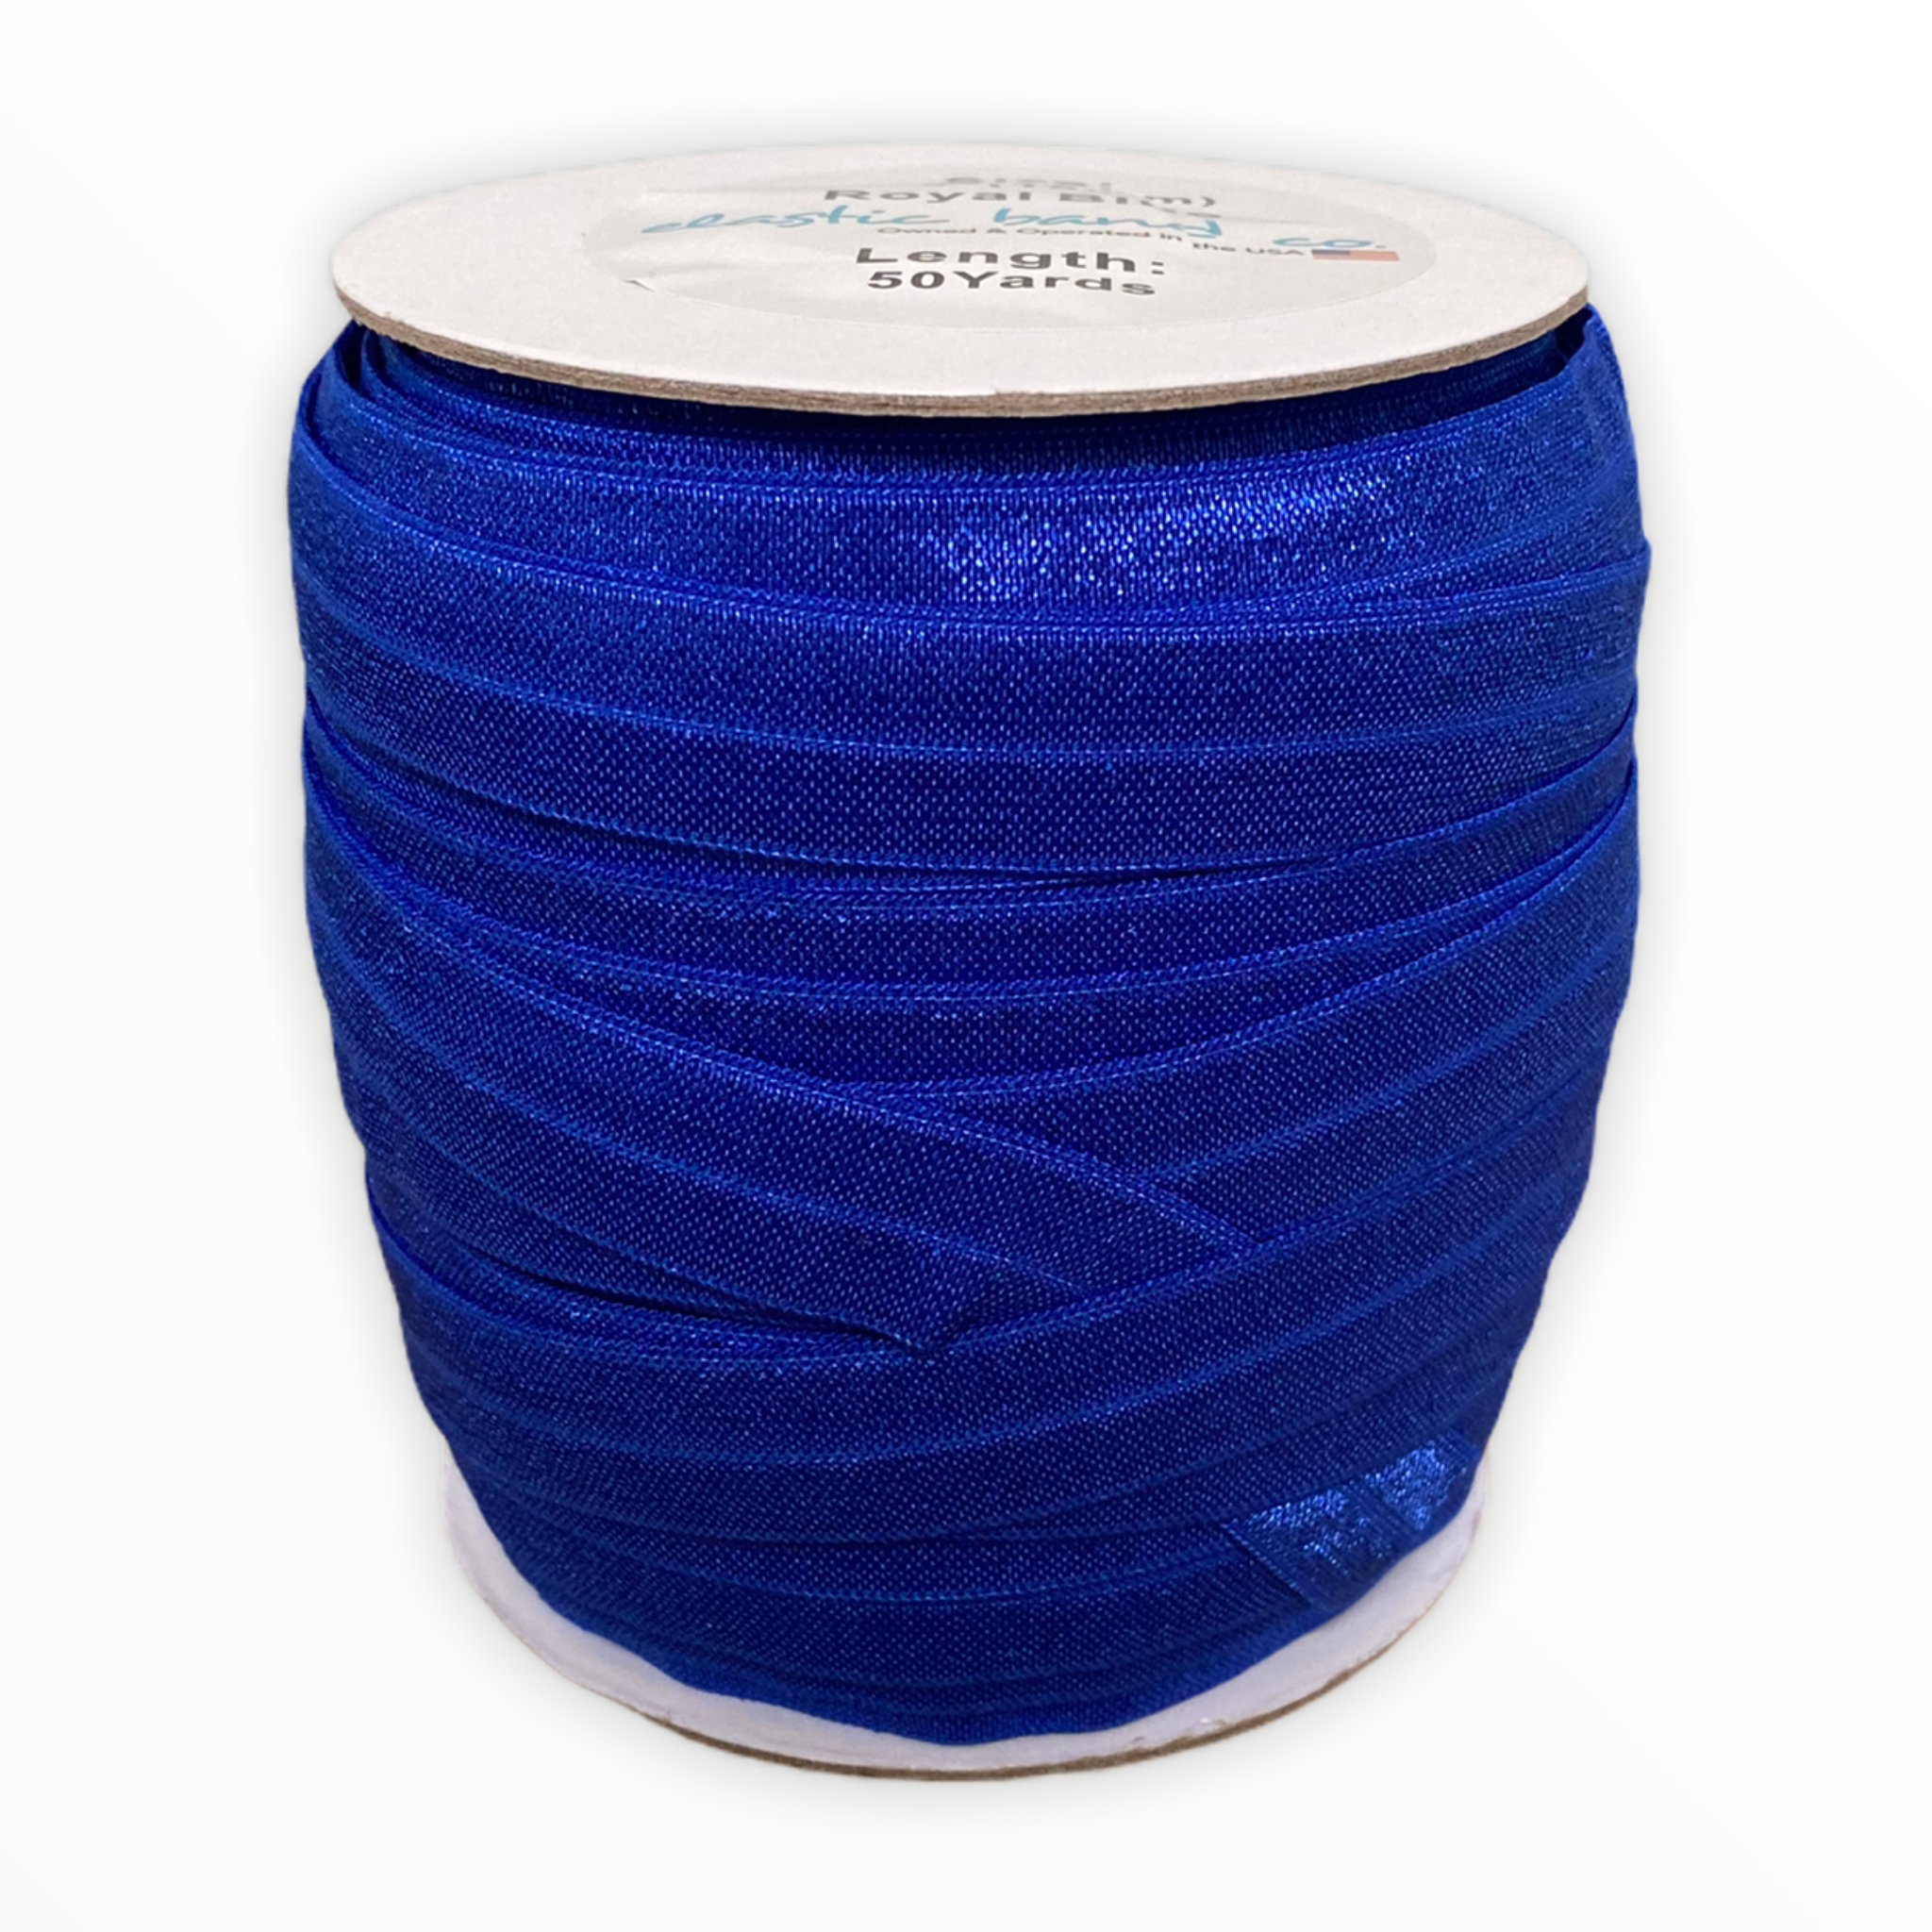 25mm 1 inch #350 Royal blue solid fold over elastic 100 yards/lot